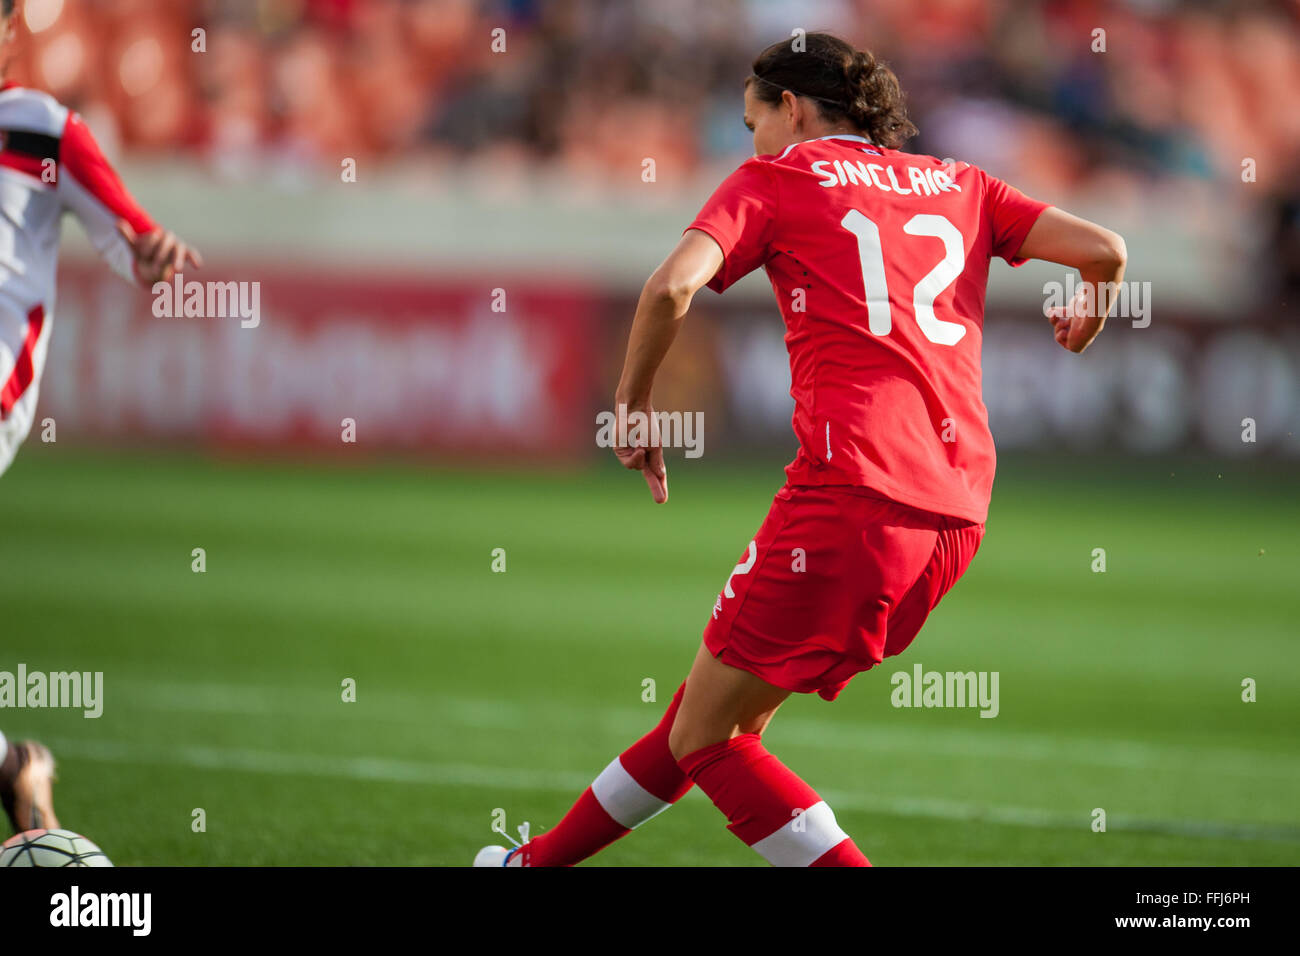 Houston, TX, USA. 14th Feb, 2016. Canada forward Christine Sinclair (12) scores her 159th international goal to pass Mia Hamm and take 2nd place on the all time goal list during a CONCACAF Olympic Qualifying soccer match between Canada and Trinidad & Tobago at BBVA Compass Stadium in Houston, TX. Canada won 6-0.Trask Smith/CSM/Alamy Live News Stock Photo